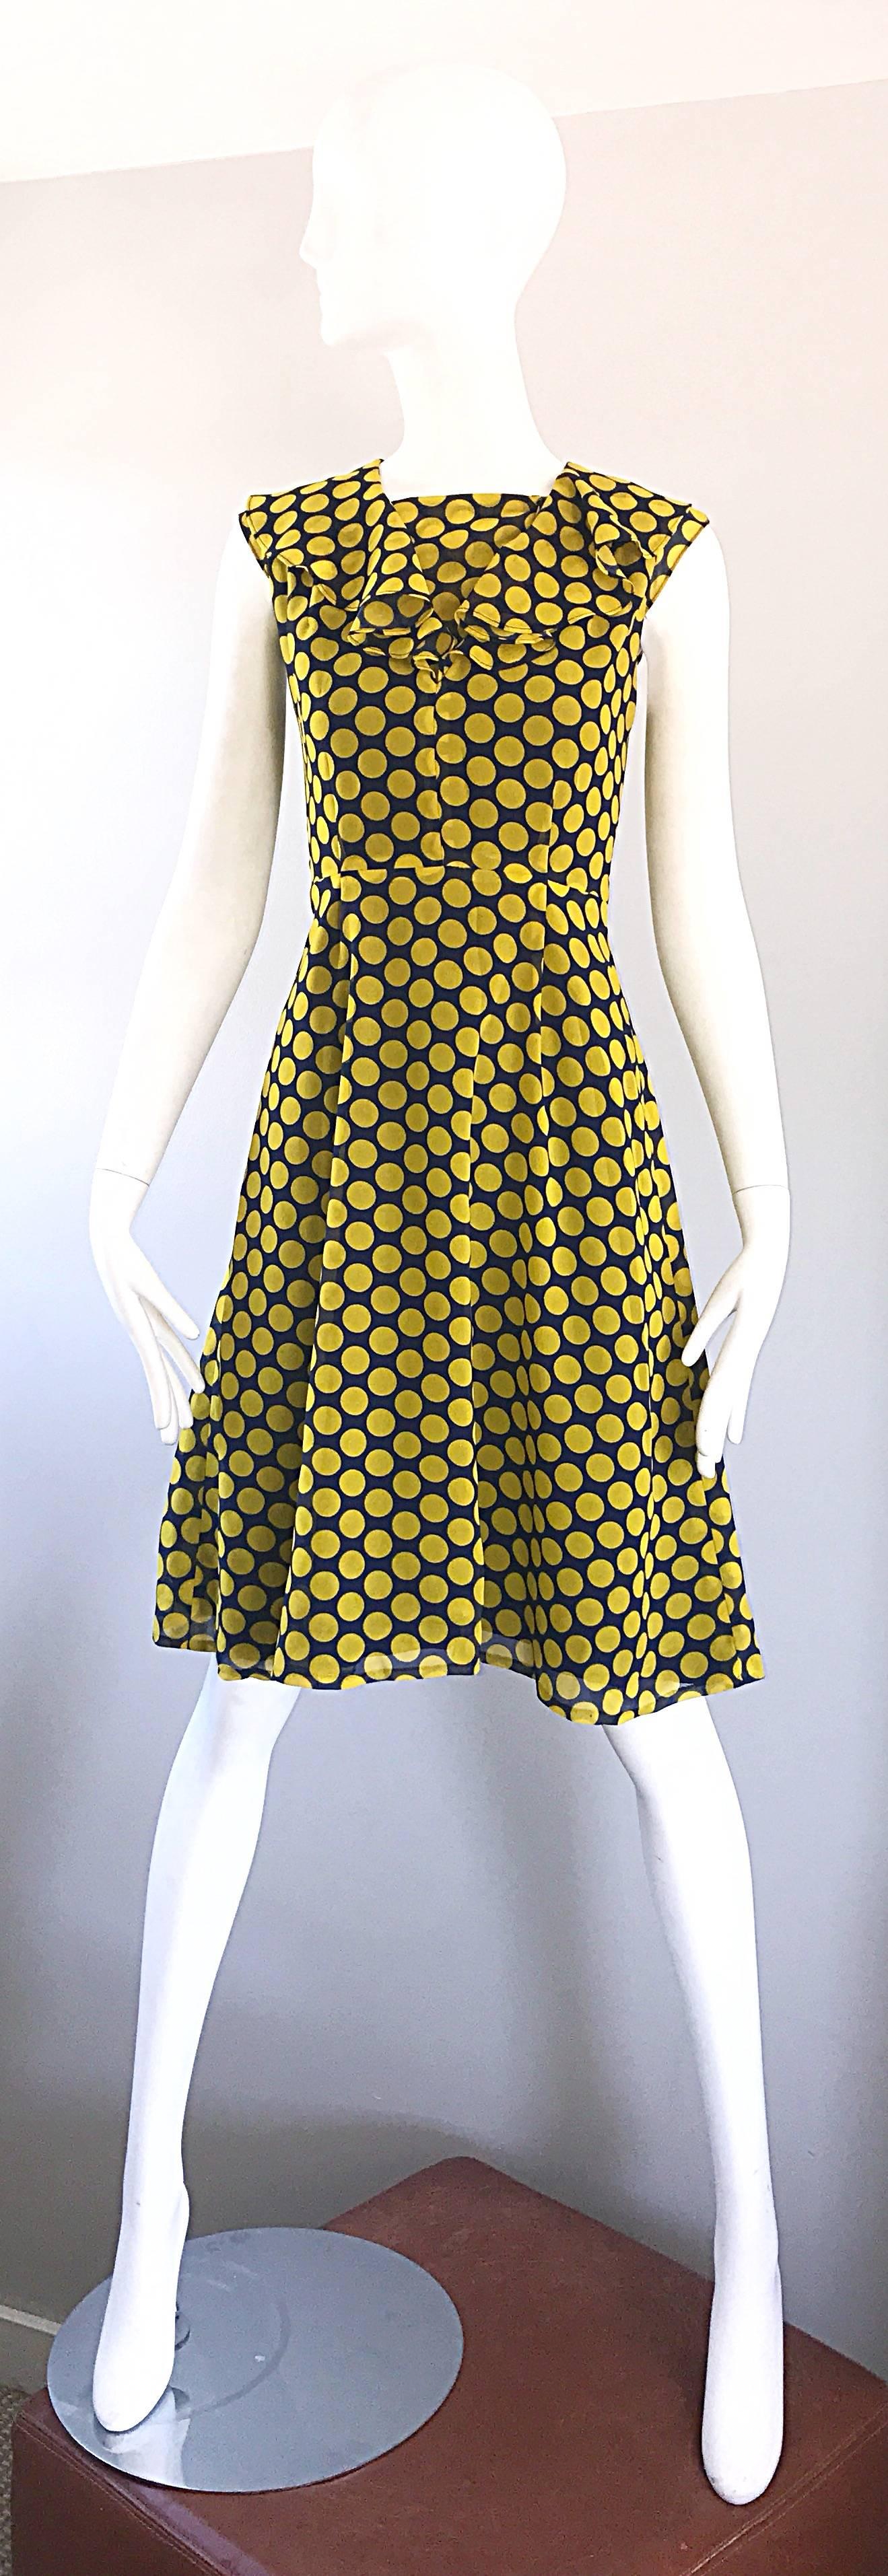 Chic early 1970s navy blue and yellow / marigold polka dot ruffle A-Line dress! Features navy polka dots throughout, with a ruffled neck. Hidden snaps shut the panel above the bust. This panel can be left undone, and flows with the ruffles. Fitted